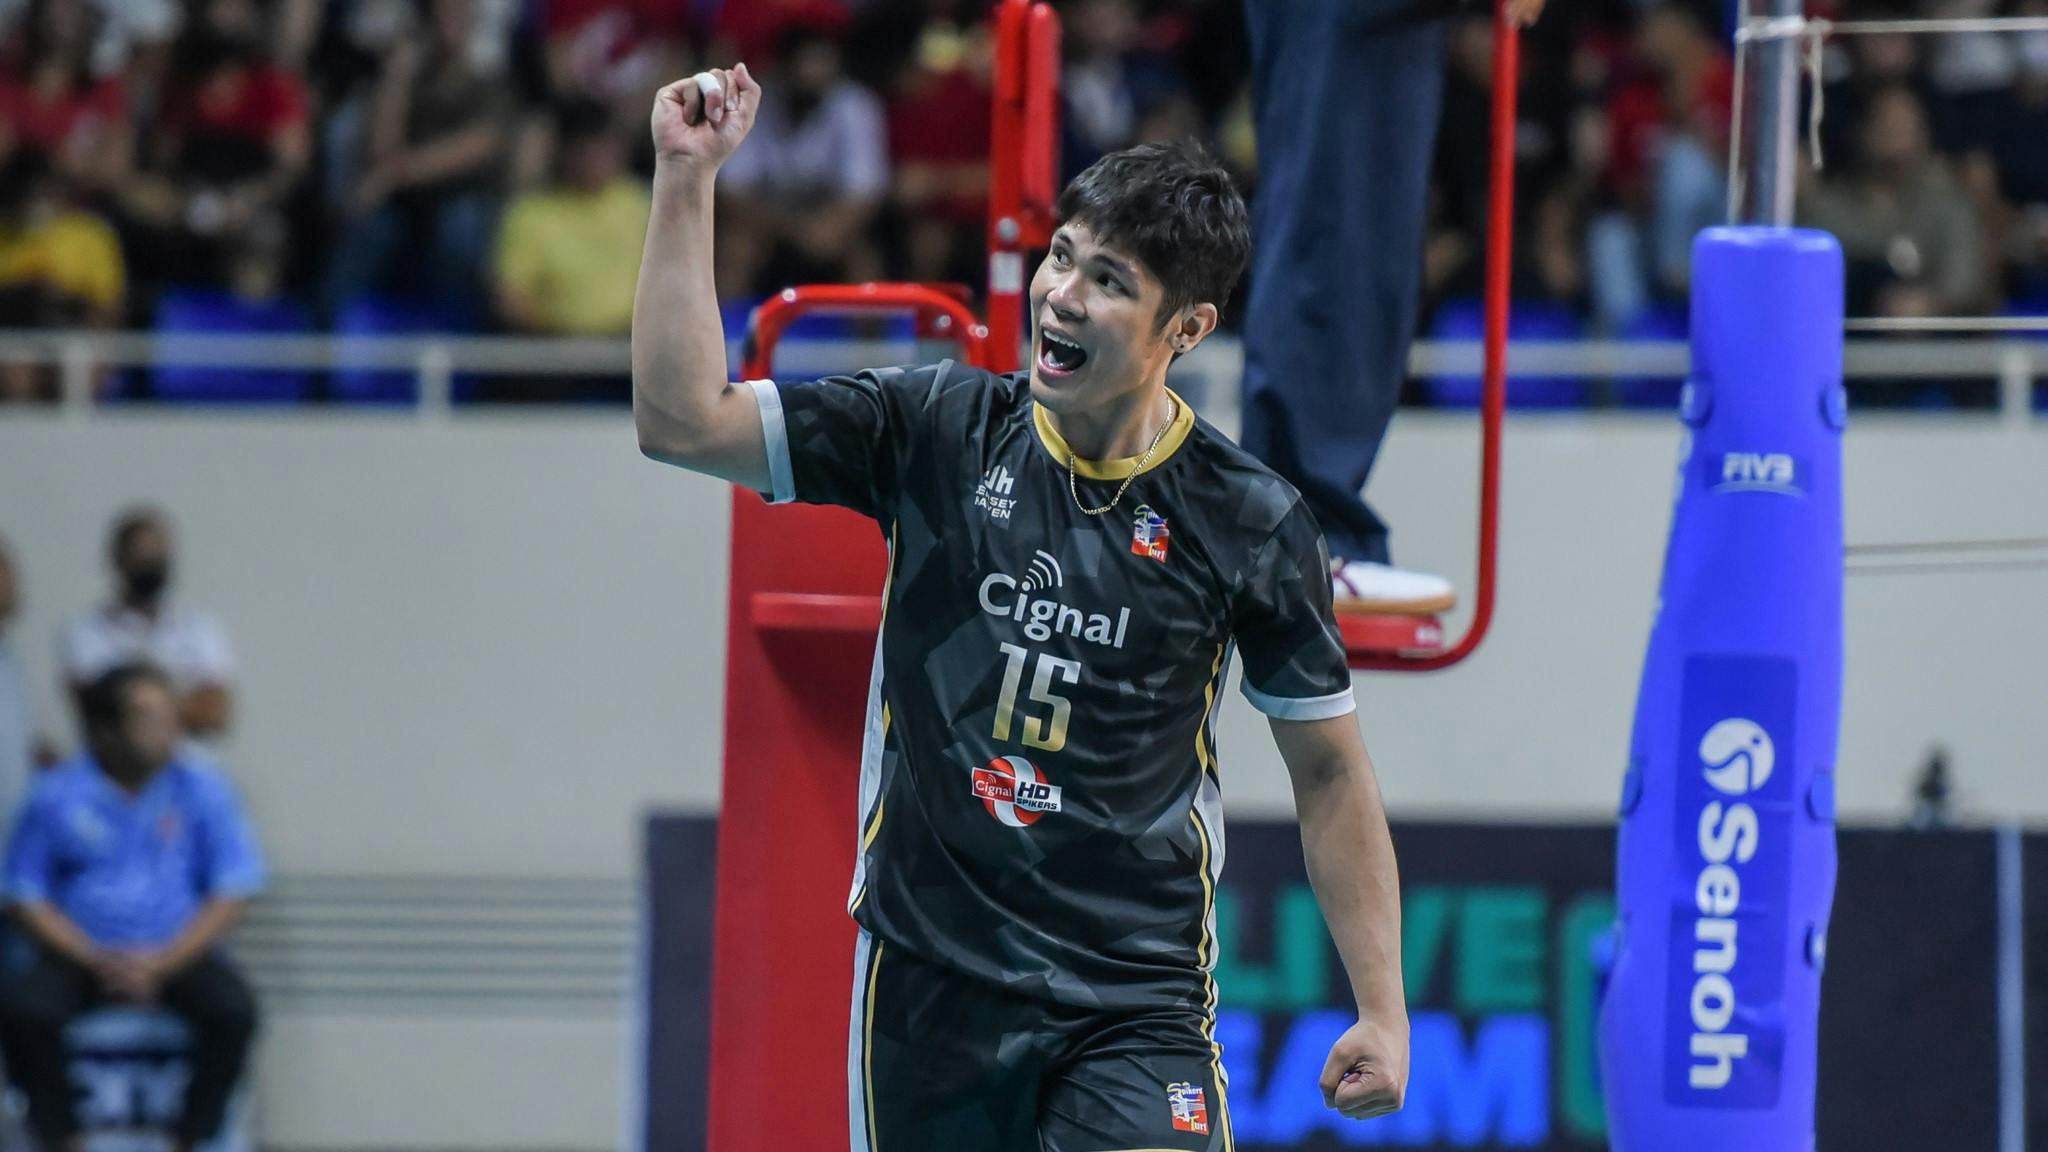 Marck Espejo joins MJ Phillips as first Filipino athletes drafted in Korean V-League